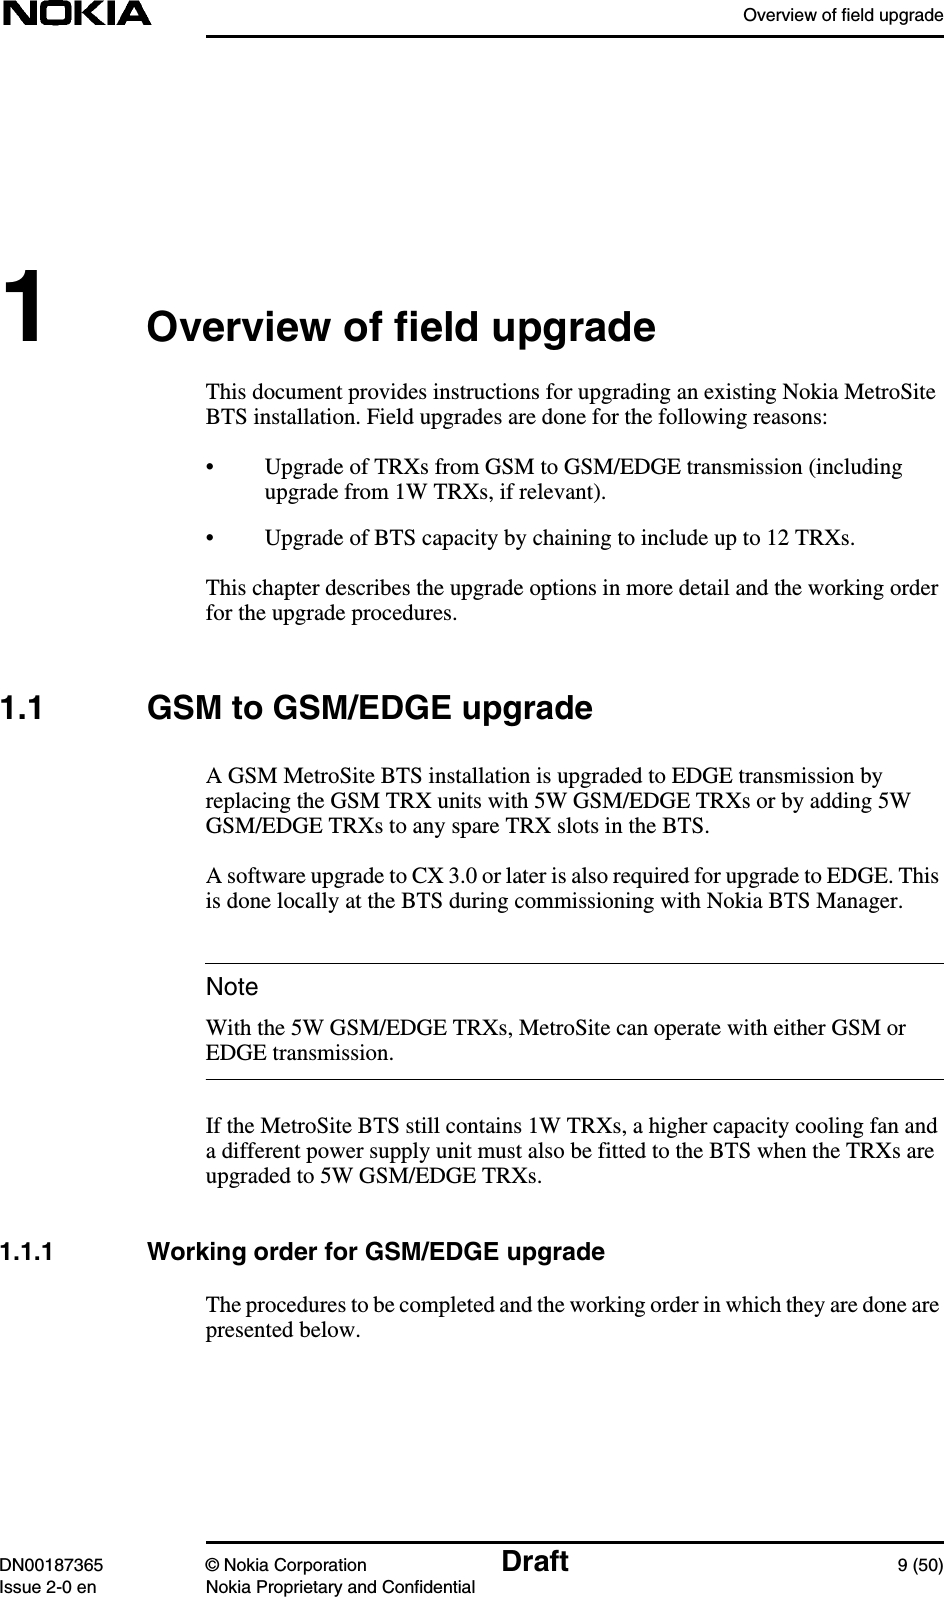 Overview of field upgradeDN00187365 © Nokia Corporation Draft 9 (50)Issue 2-0 en Nokia Proprietary and ConfidentialNote1Overview of field upgradeThis document provides instructions for upgrading an existing Nokia MetroSiteBTS installation. Field upgrades are done for the following reasons:• Upgrade of TRXs from GSM to GSM/EDGE transmission (includingupgrade from 1W TRXs, if relevant).• Upgrade of BTS capacity by chaining to include up to 12 TRXs.This chapter describes the upgrade options in more detail and the working orderfor the upgrade procedures.1.1 GSM to GSM/EDGE upgradeA GSM MetroSite BTS installation is upgraded to EDGE transmission byreplacing the GSM TRX units with 5W GSM/EDGE TRXs or by adding 5WGSM/EDGE TRXs to any spare TRX slots in the BTS.A software upgrade to CX 3.0 or later is also required for upgrade to EDGE. Thisis done locally at the BTS during commissioning with Nokia BTS Manager.With the 5W GSM/EDGE TRXs, MetroSite can operate with either GSM orEDGE transmission.If the MetroSite BTS still contains 1W TRXs, a higher capacity cooling fan anda different power supply unit must also be fitted to the BTS when the TRXs areupgraded to 5W GSM/EDGE TRXs.1.1.1 Working order for GSM/EDGE upgradeThe procedures to be completed and the working order in which they are done arepresented below.